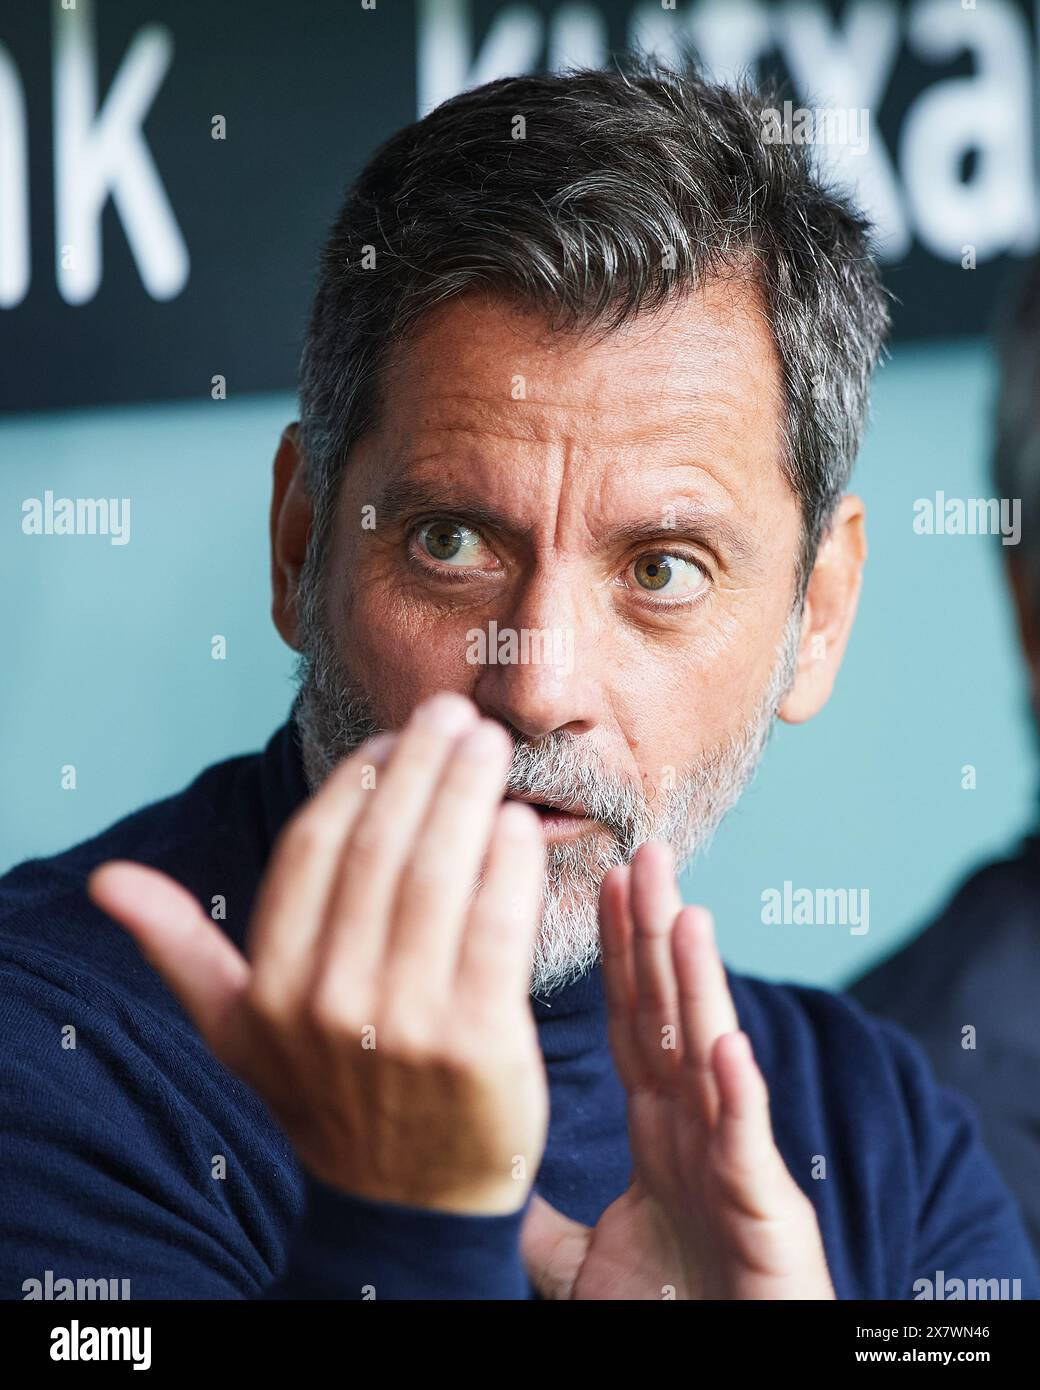 Sevilla FC head coach Quique Sanchez Flores looks on during the LaLiga EA Sports match between Athletic Club and Sevilla FC at San Mames Stadium on Ma Stock Photo